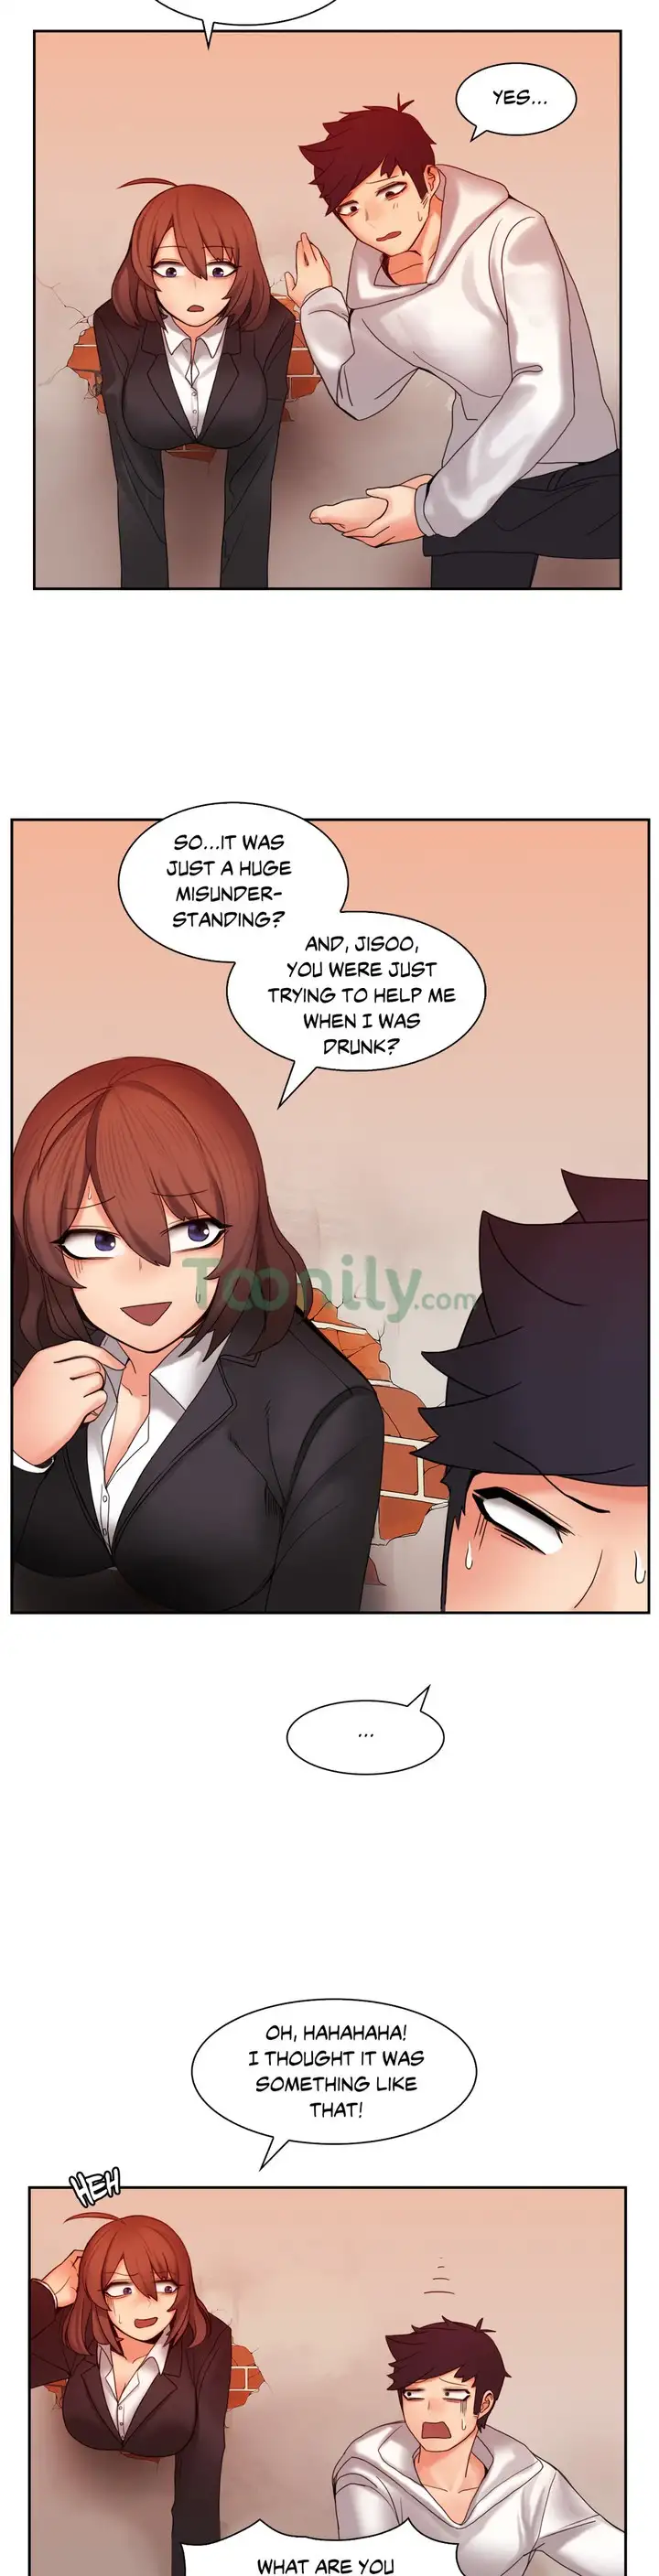 The Girl That Got Stuck in the Wall - Chapter 9 Page 13